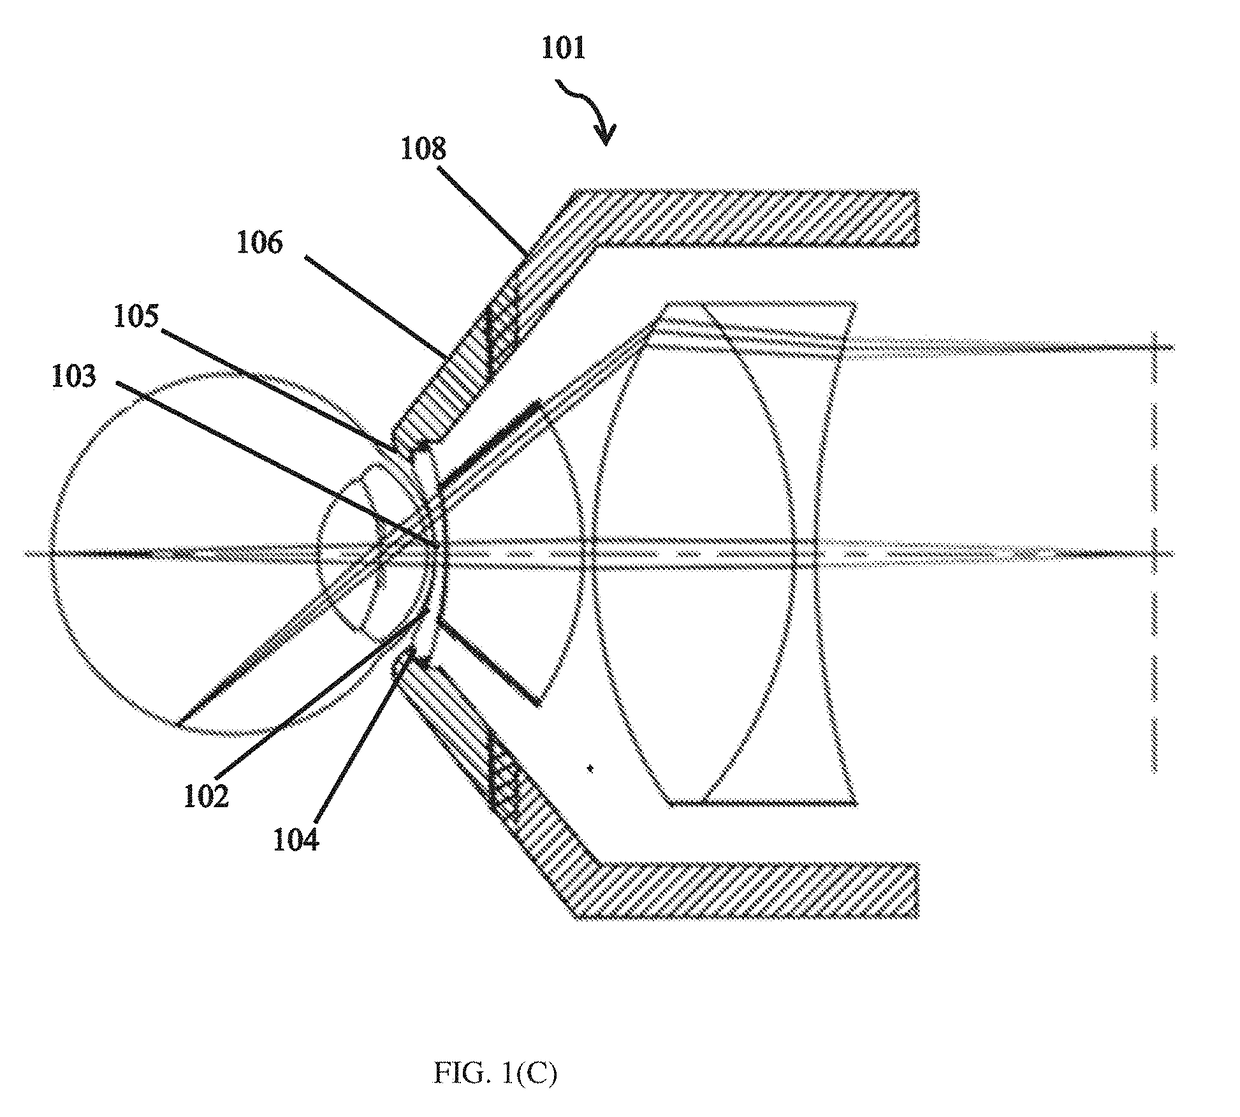 Disposable cap for an eye imaging apparatus and related methods